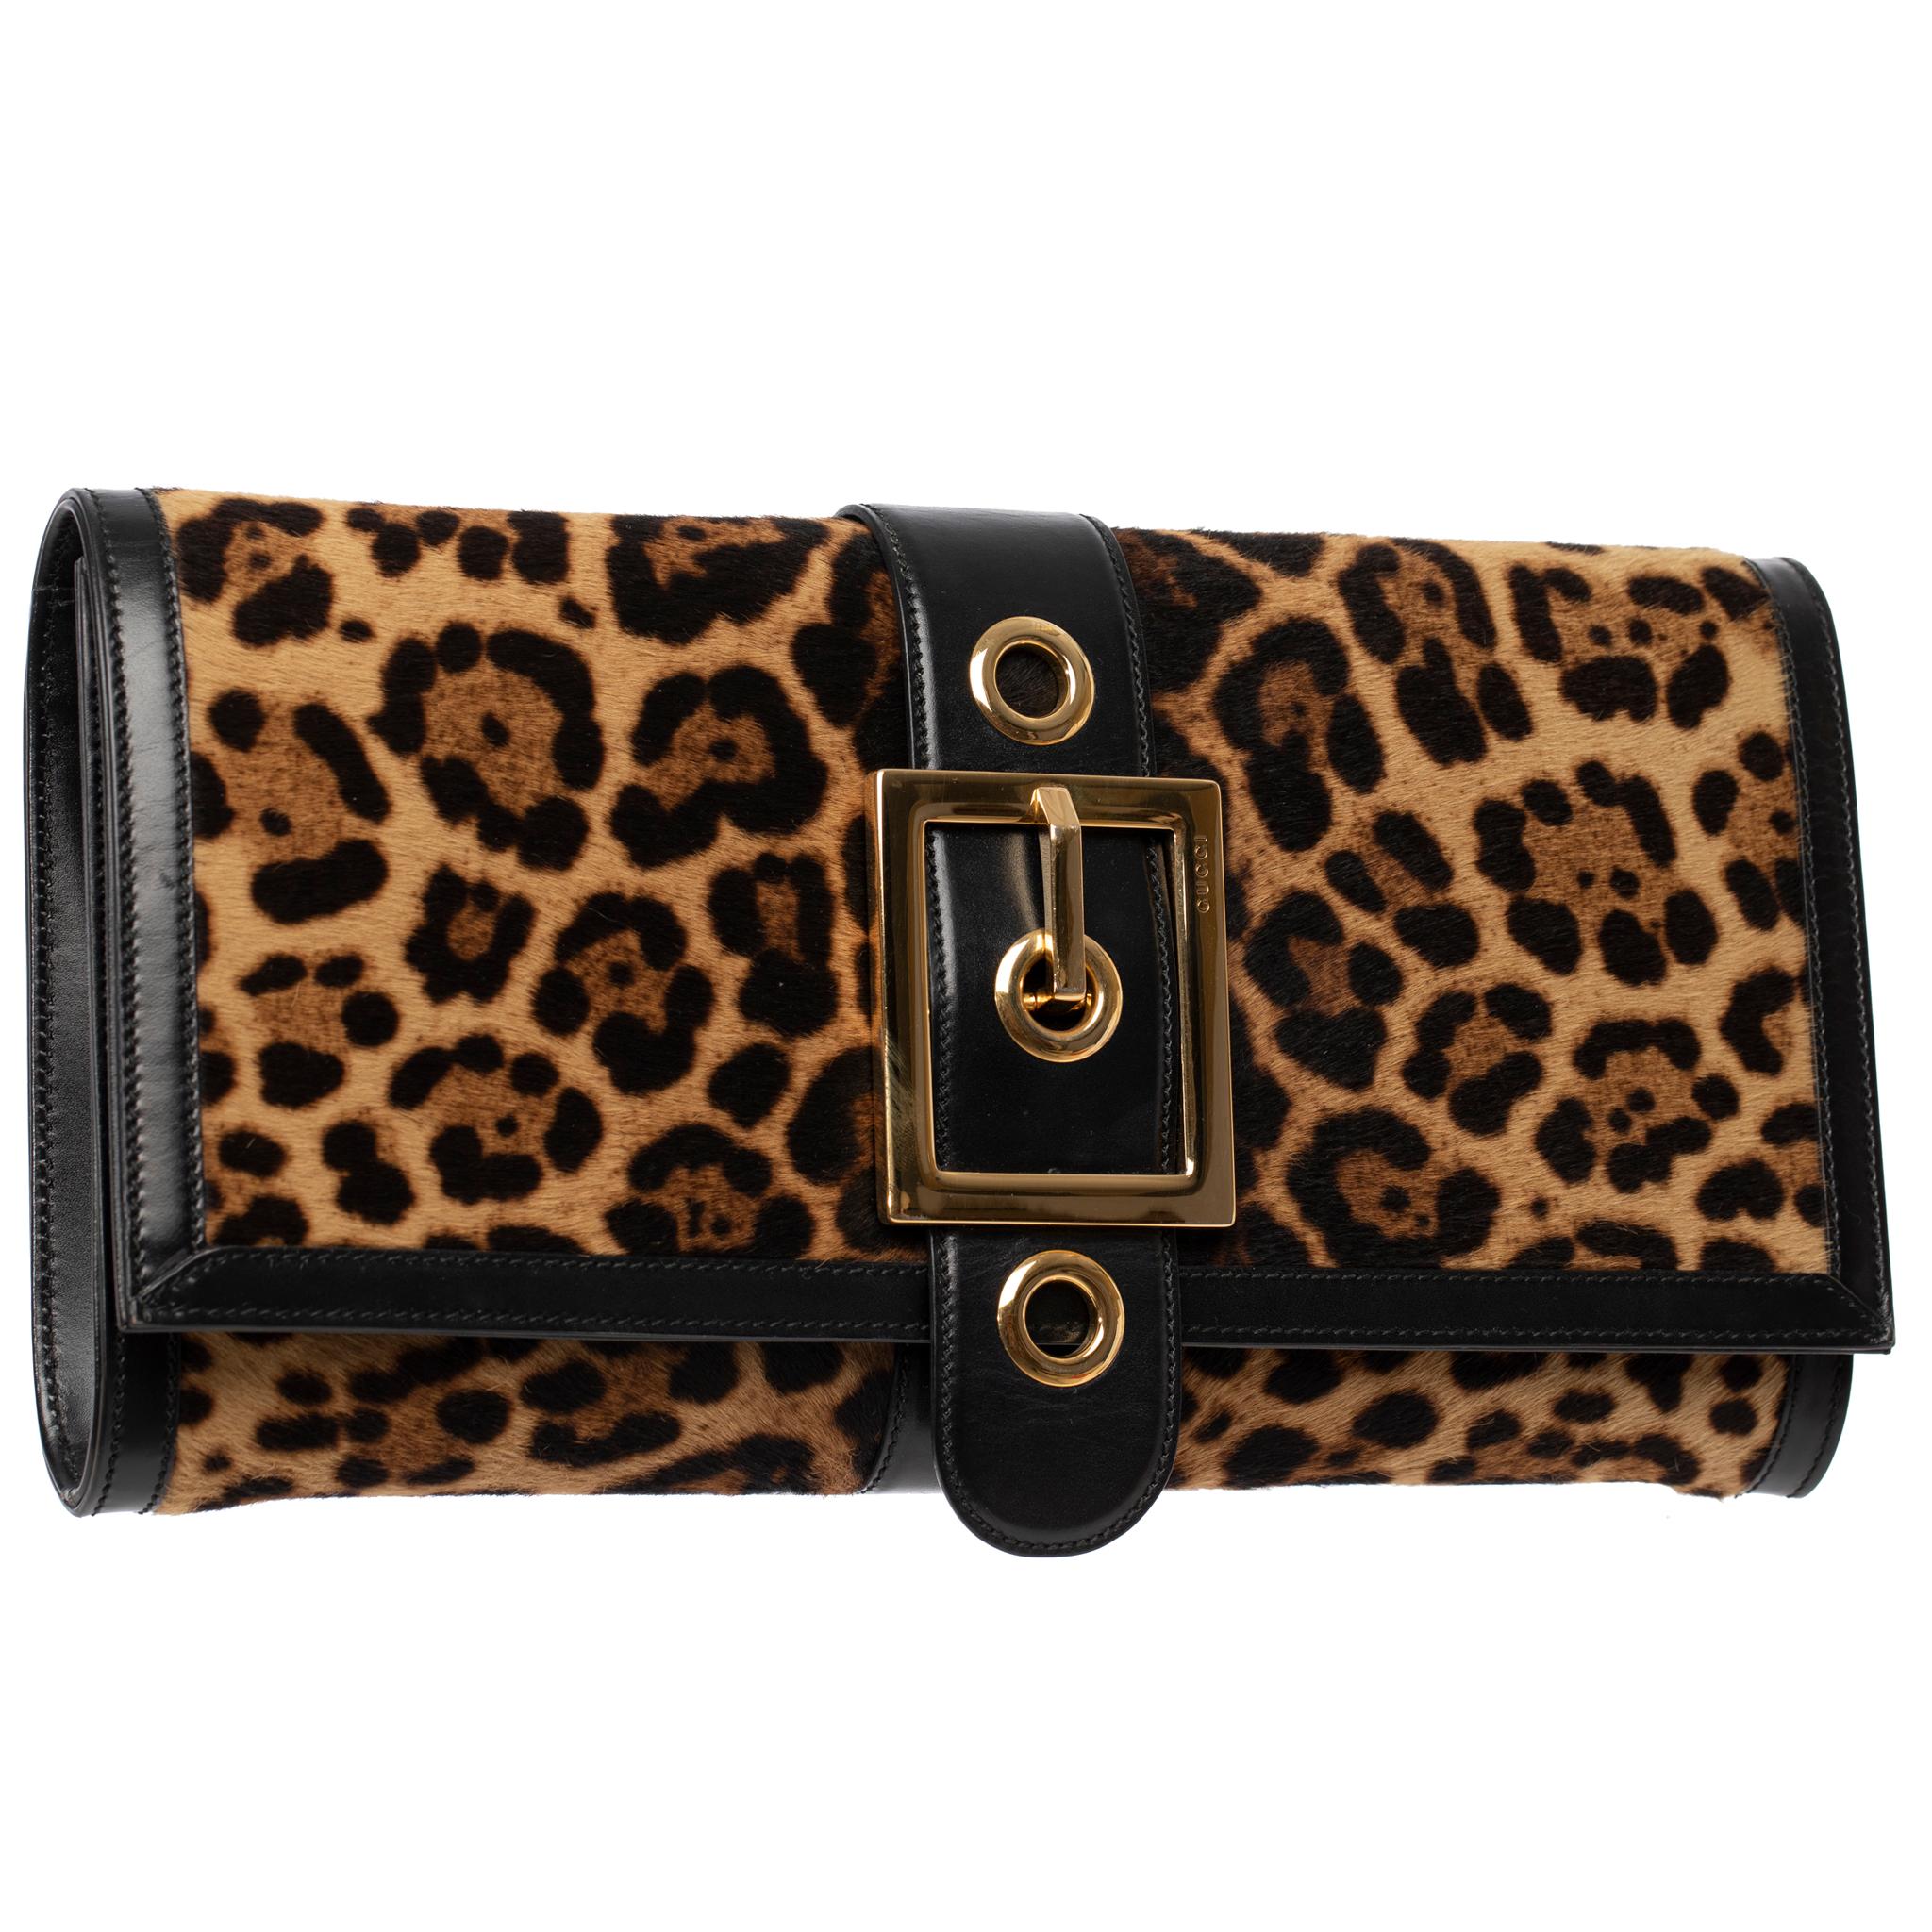 Brand: Gucci

Product: Leopard Print Clutch

Size: L 36 x H 20 x D 3.5 Cm

Colour: Black & Leopard Print Pony Hair

Material: Smooth Leather & Pony Hair

Hardware: Gold-Tone

Year: 2013

Condition: Preloved; Very Good

Accompanied By: Clutch